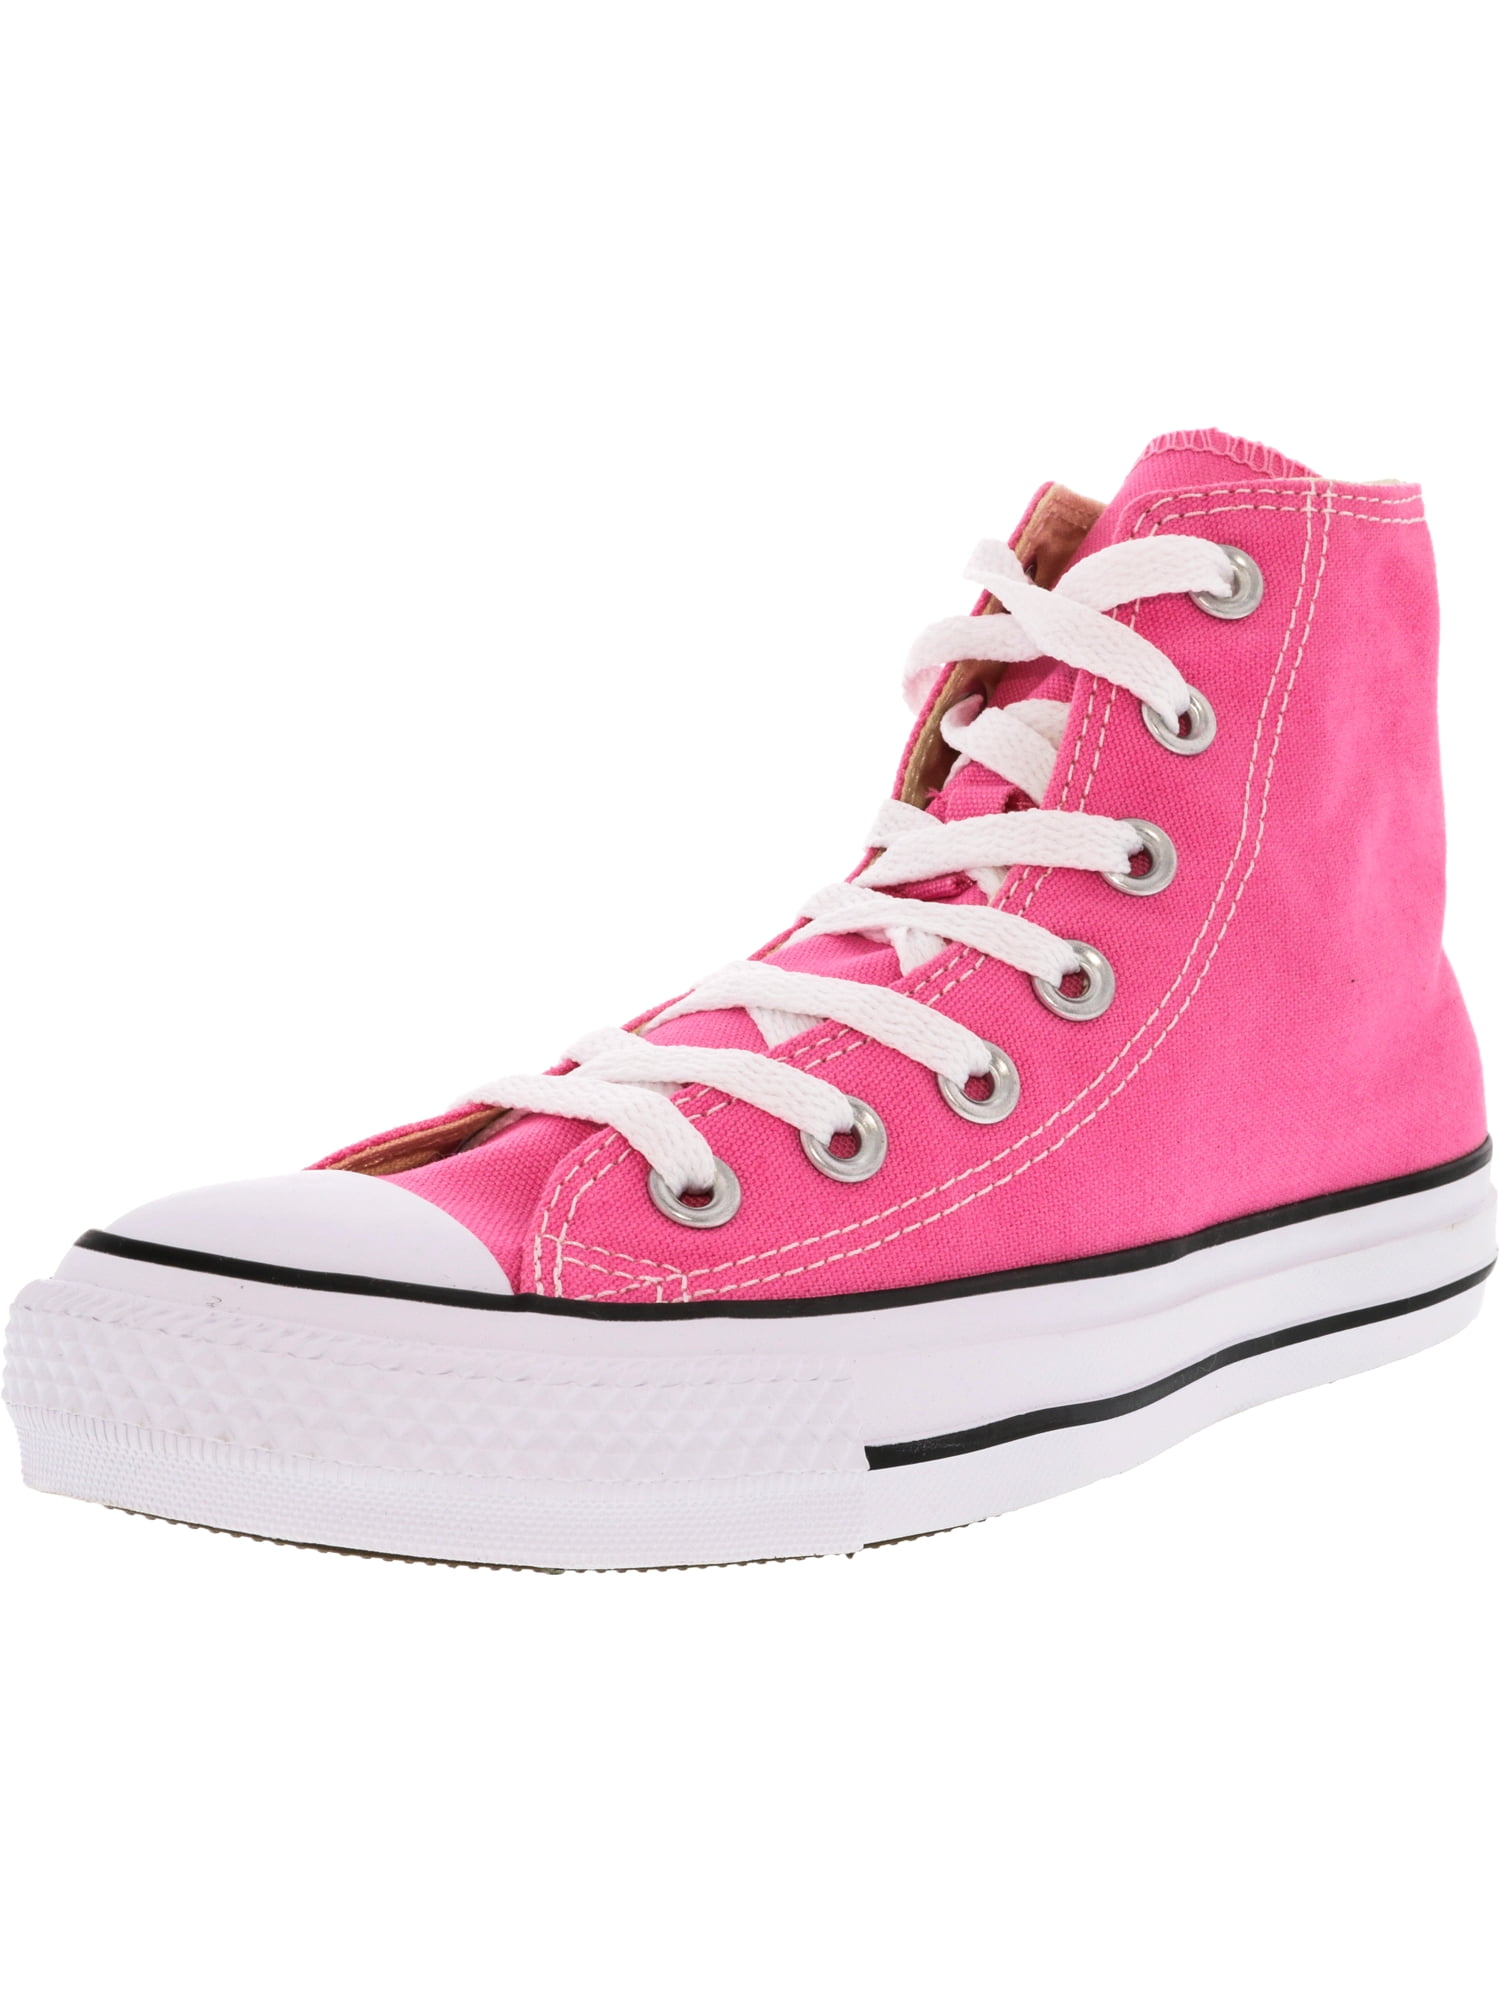 pink converse adult